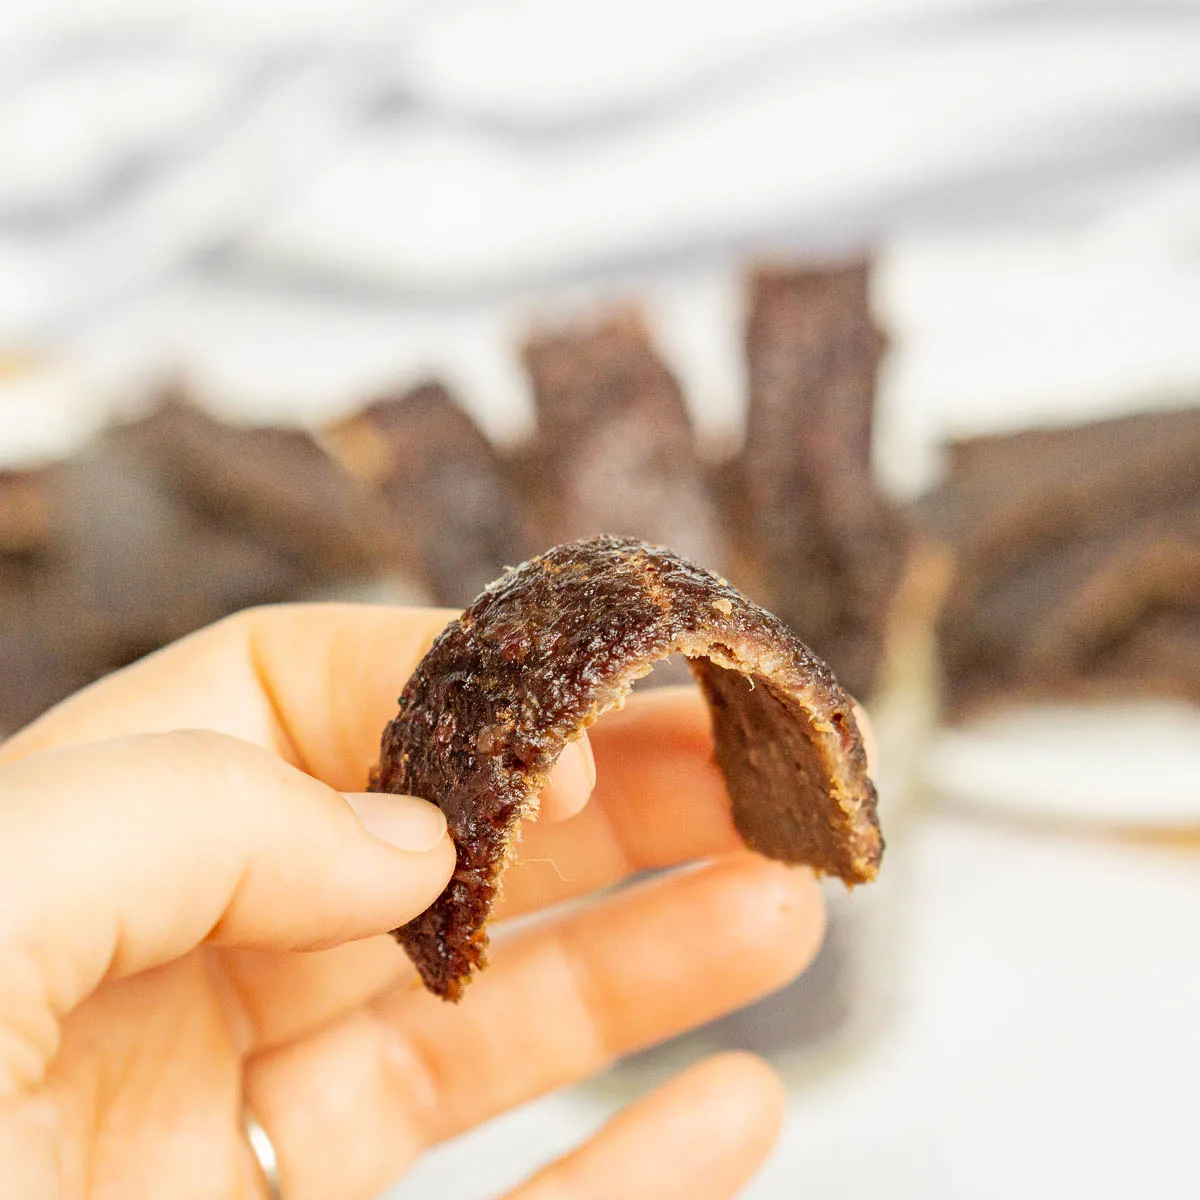 Bending a piece of ground beef jerky to show how soft it is